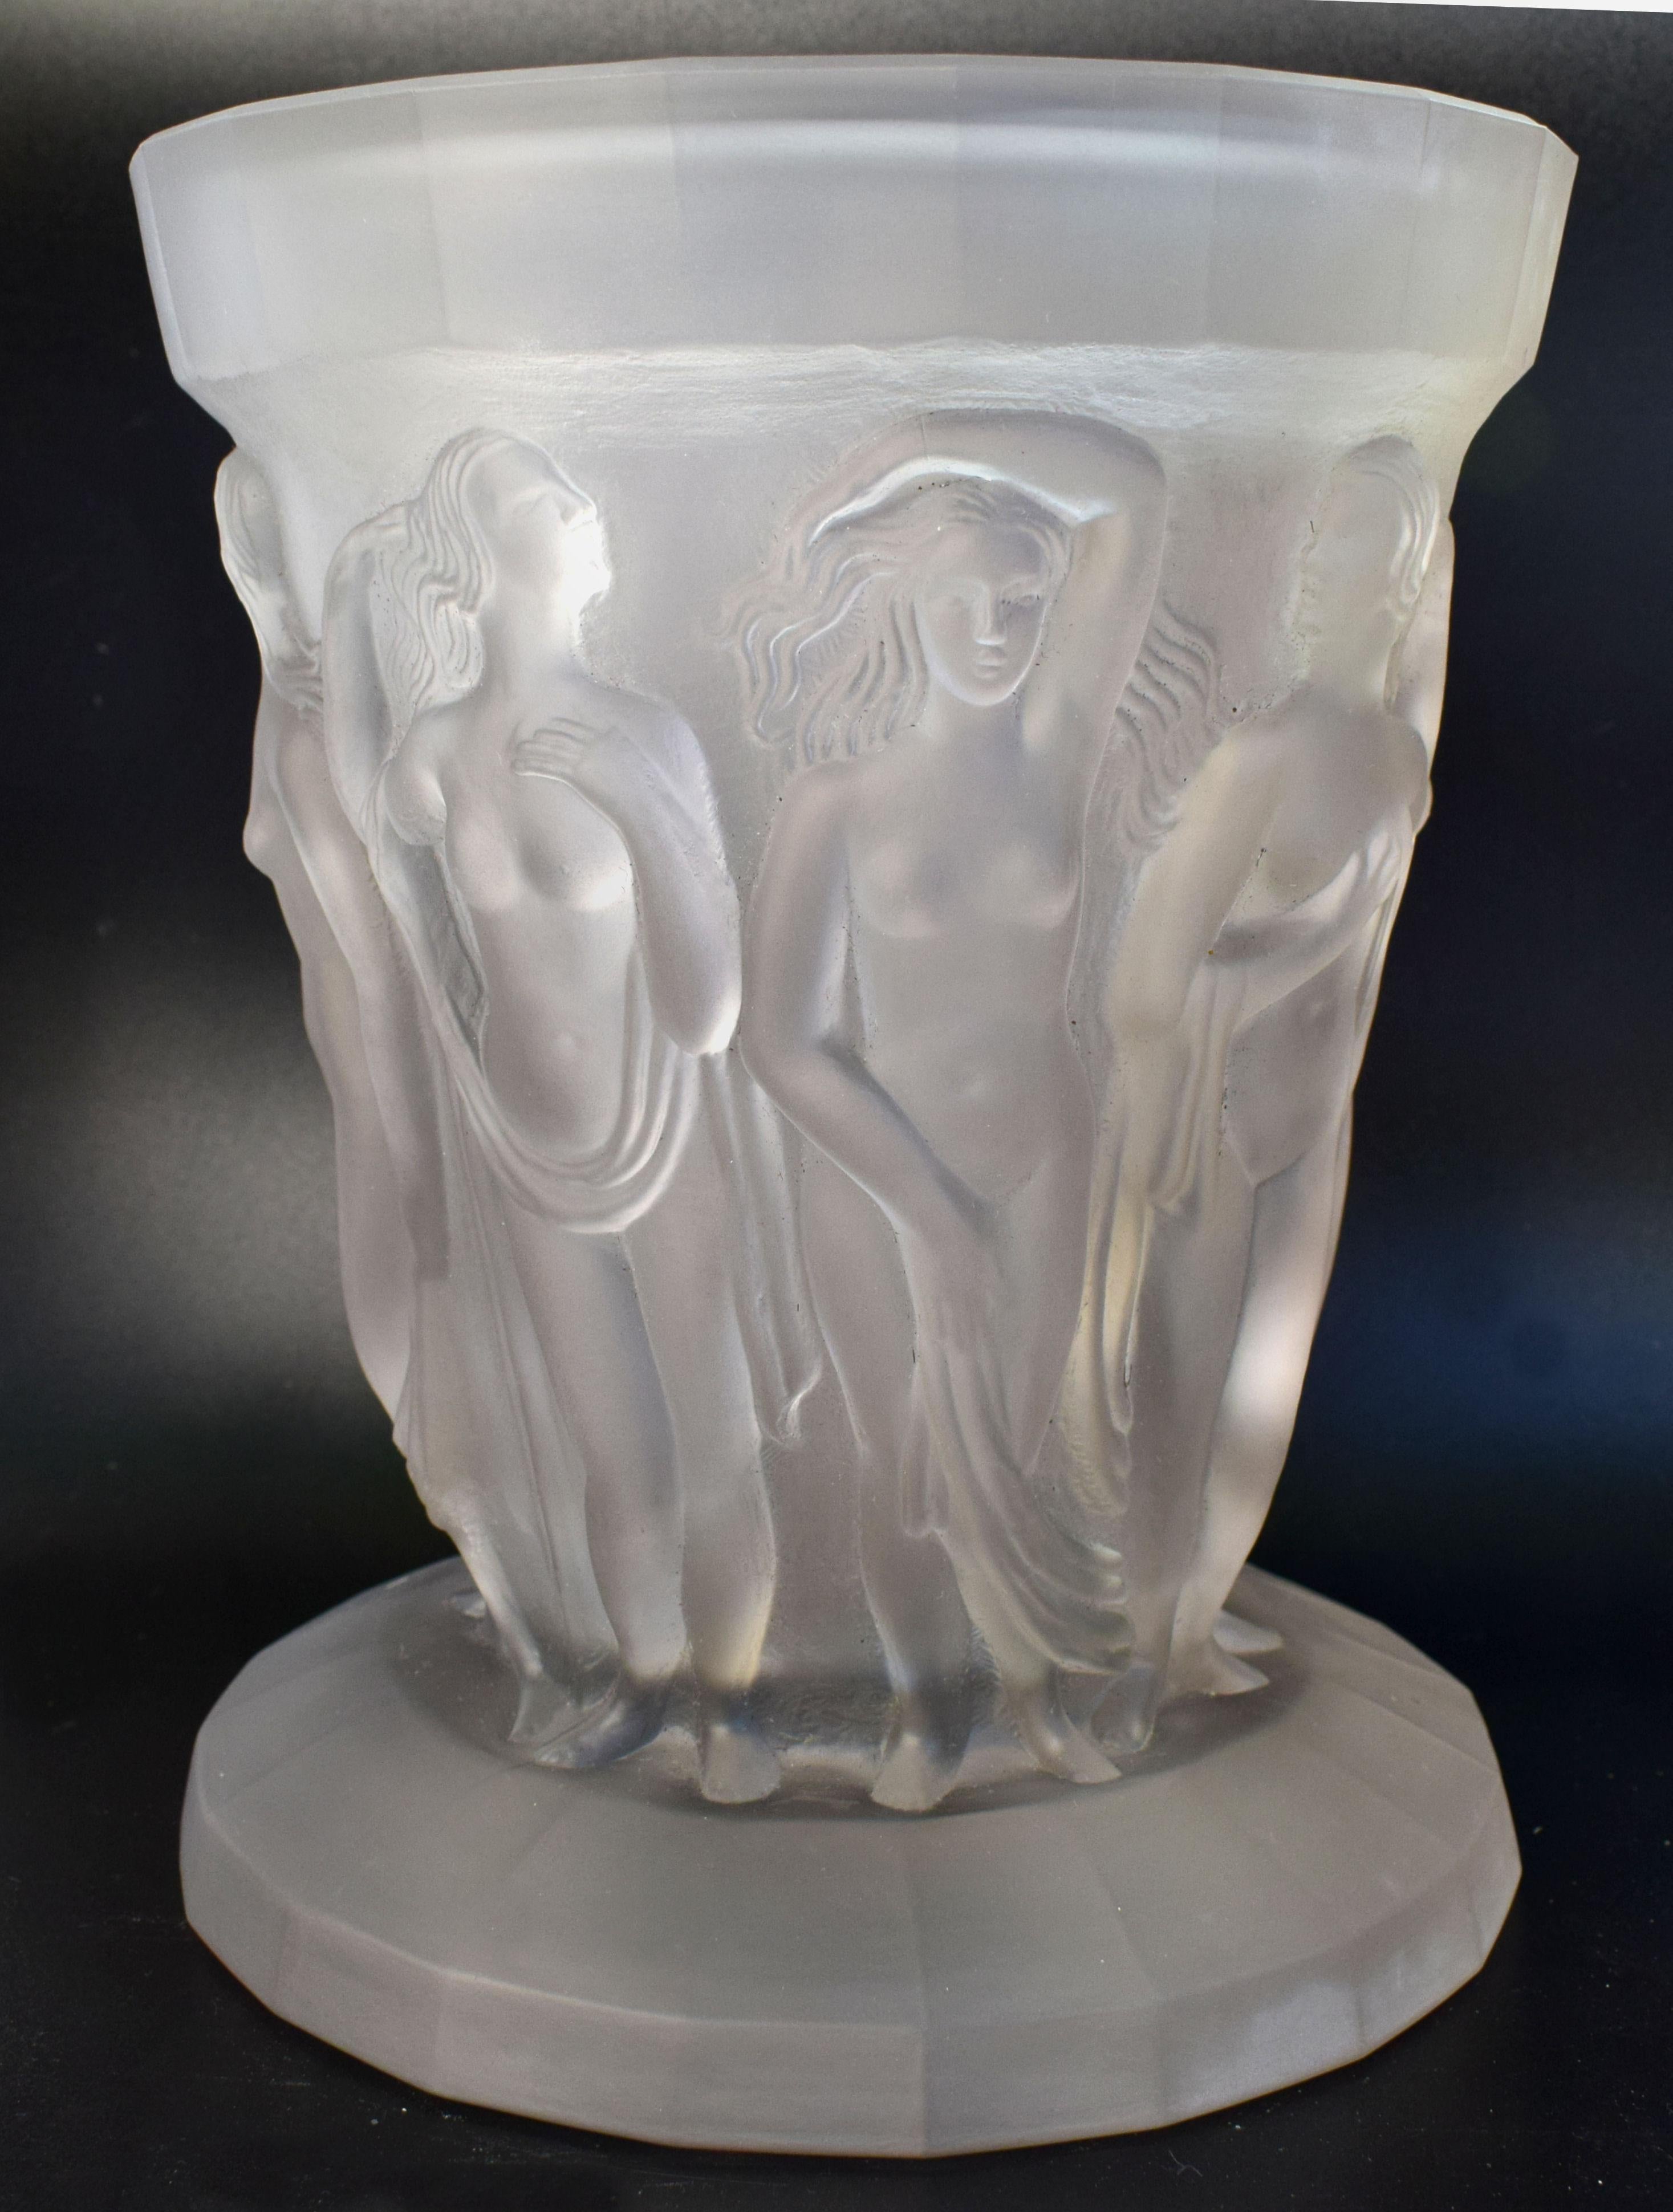 For your consideration is this beautifully detailed and extremely attractive Art Deco Czech vase. The outside is surrounded by semi clad females, all in different poseys and in varying degrees of dress. The detailing is superb and at every angle has